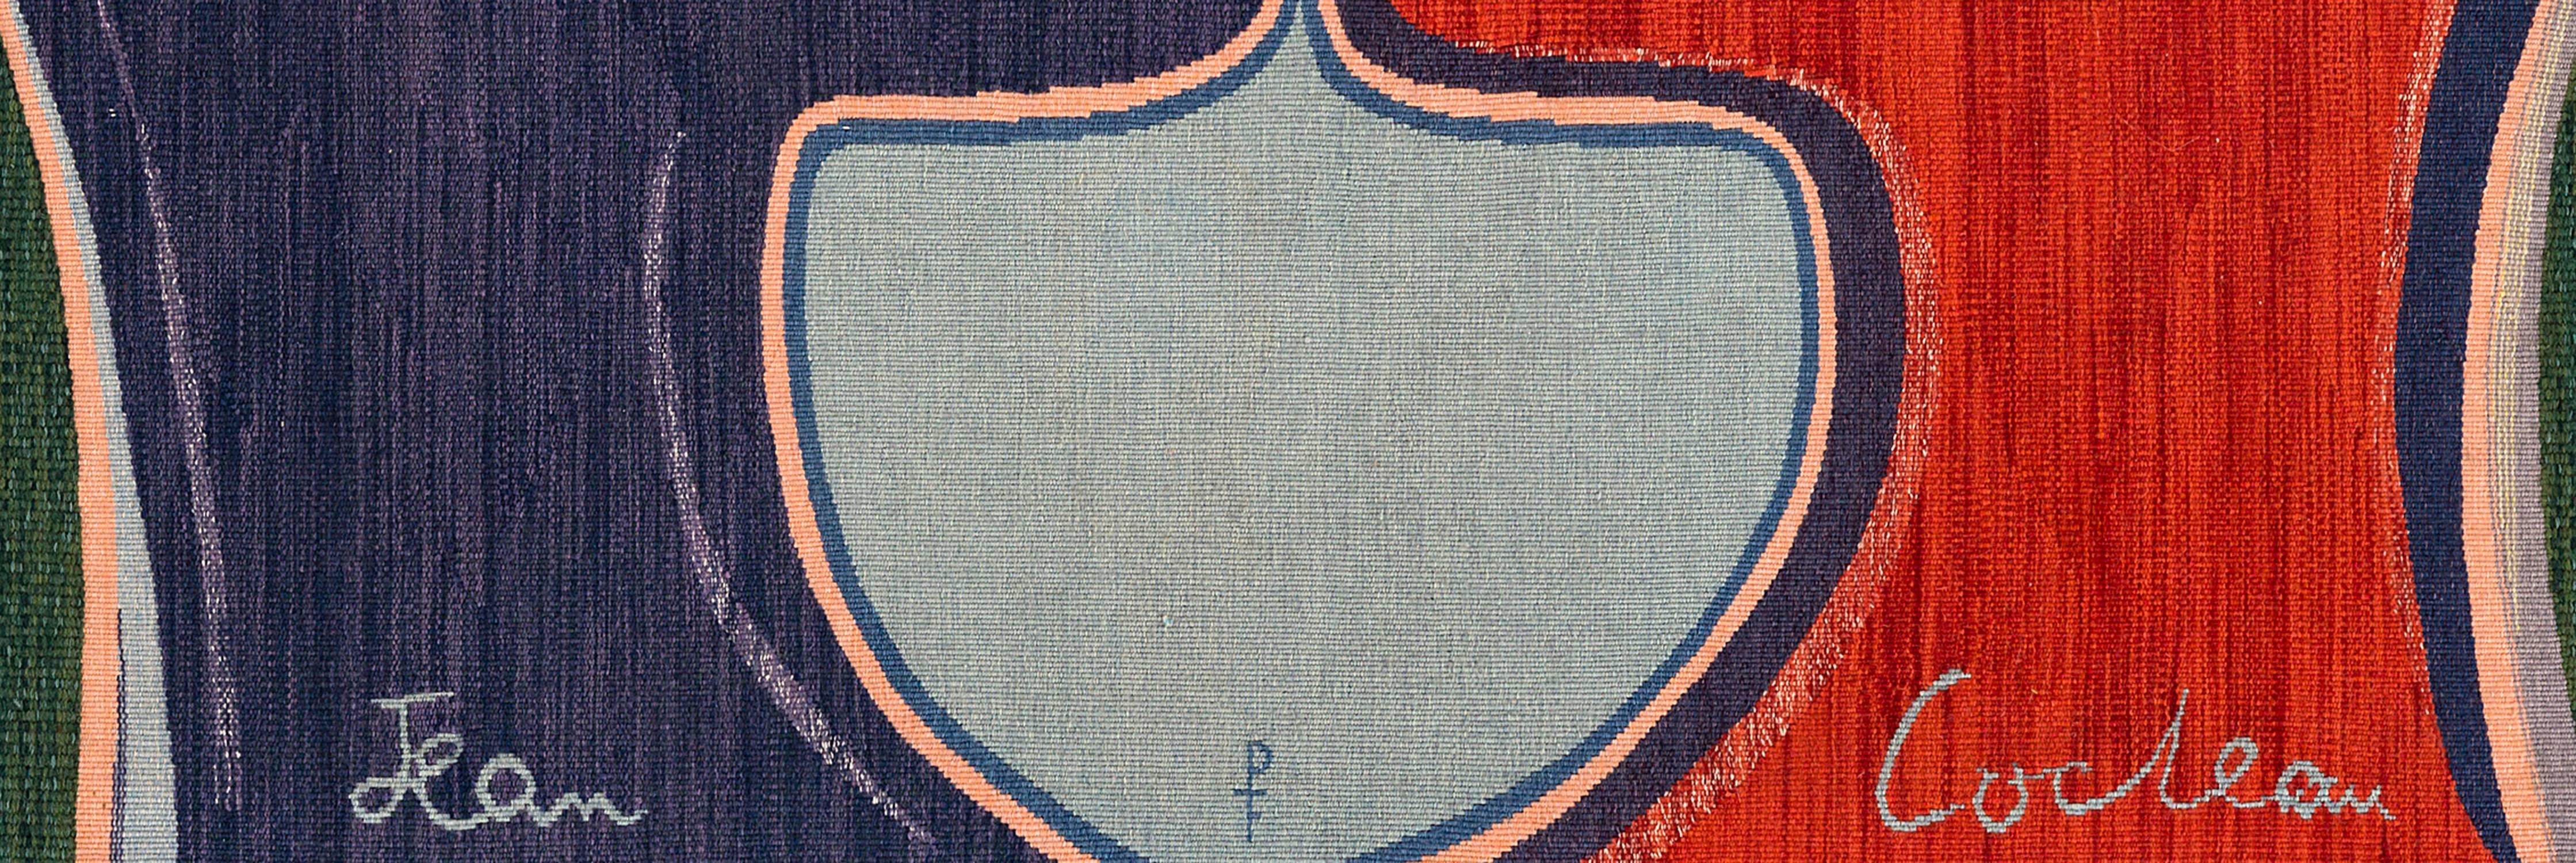 Hand-Woven 20th Century Tapestry after Jean Cocteau